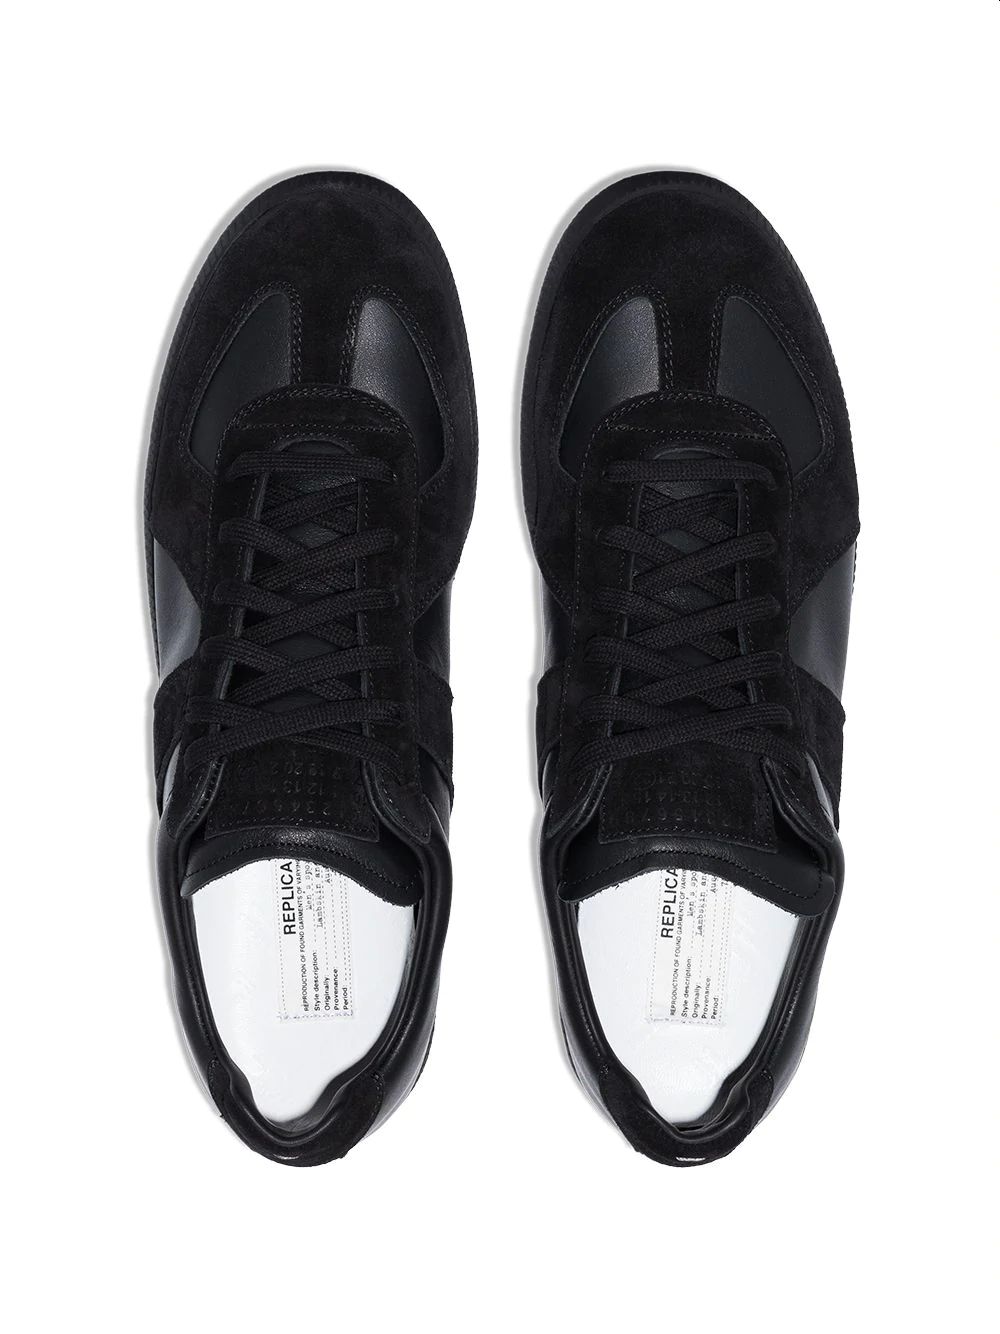 Face up Inactive Relaxing MAISON MARGIELA Replica low-top sneakers ⋆ Couturier